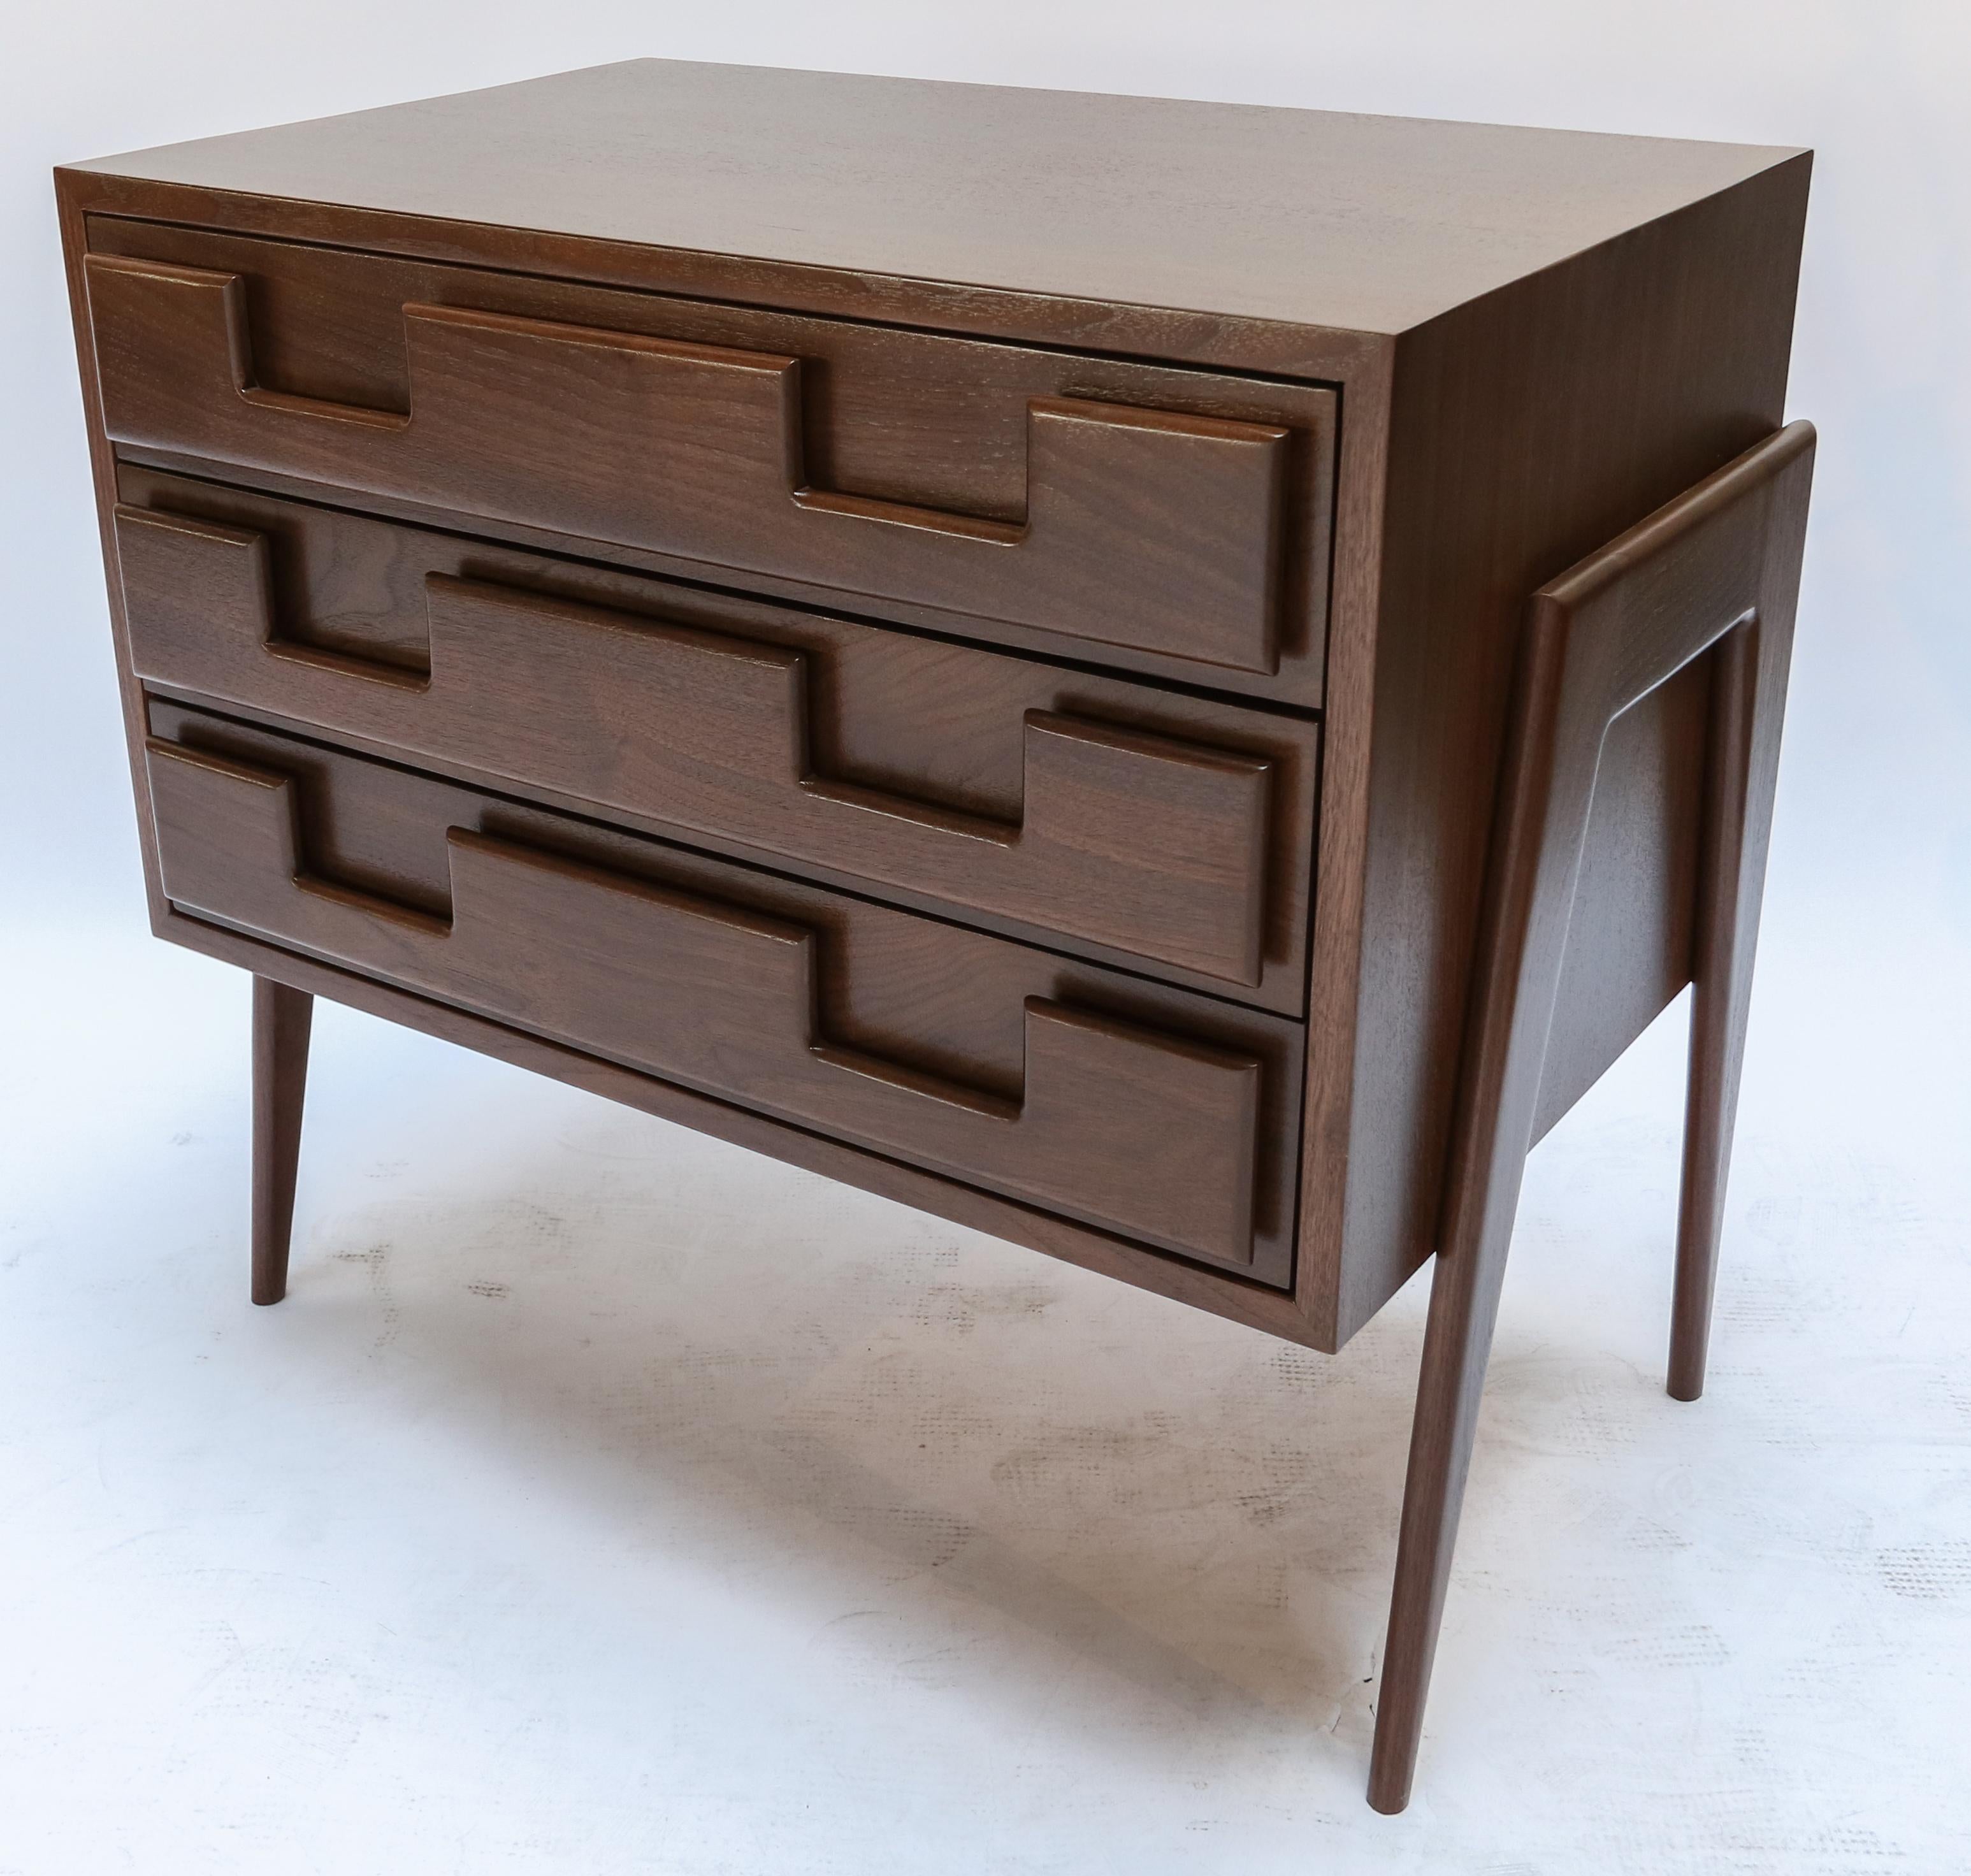 Large custom nightstands American walnut nightstands with midcentury Italian styling with three drawers.  Made in Los Angeles  by Adesso Imports.

Can be done in different finishes and sizes.